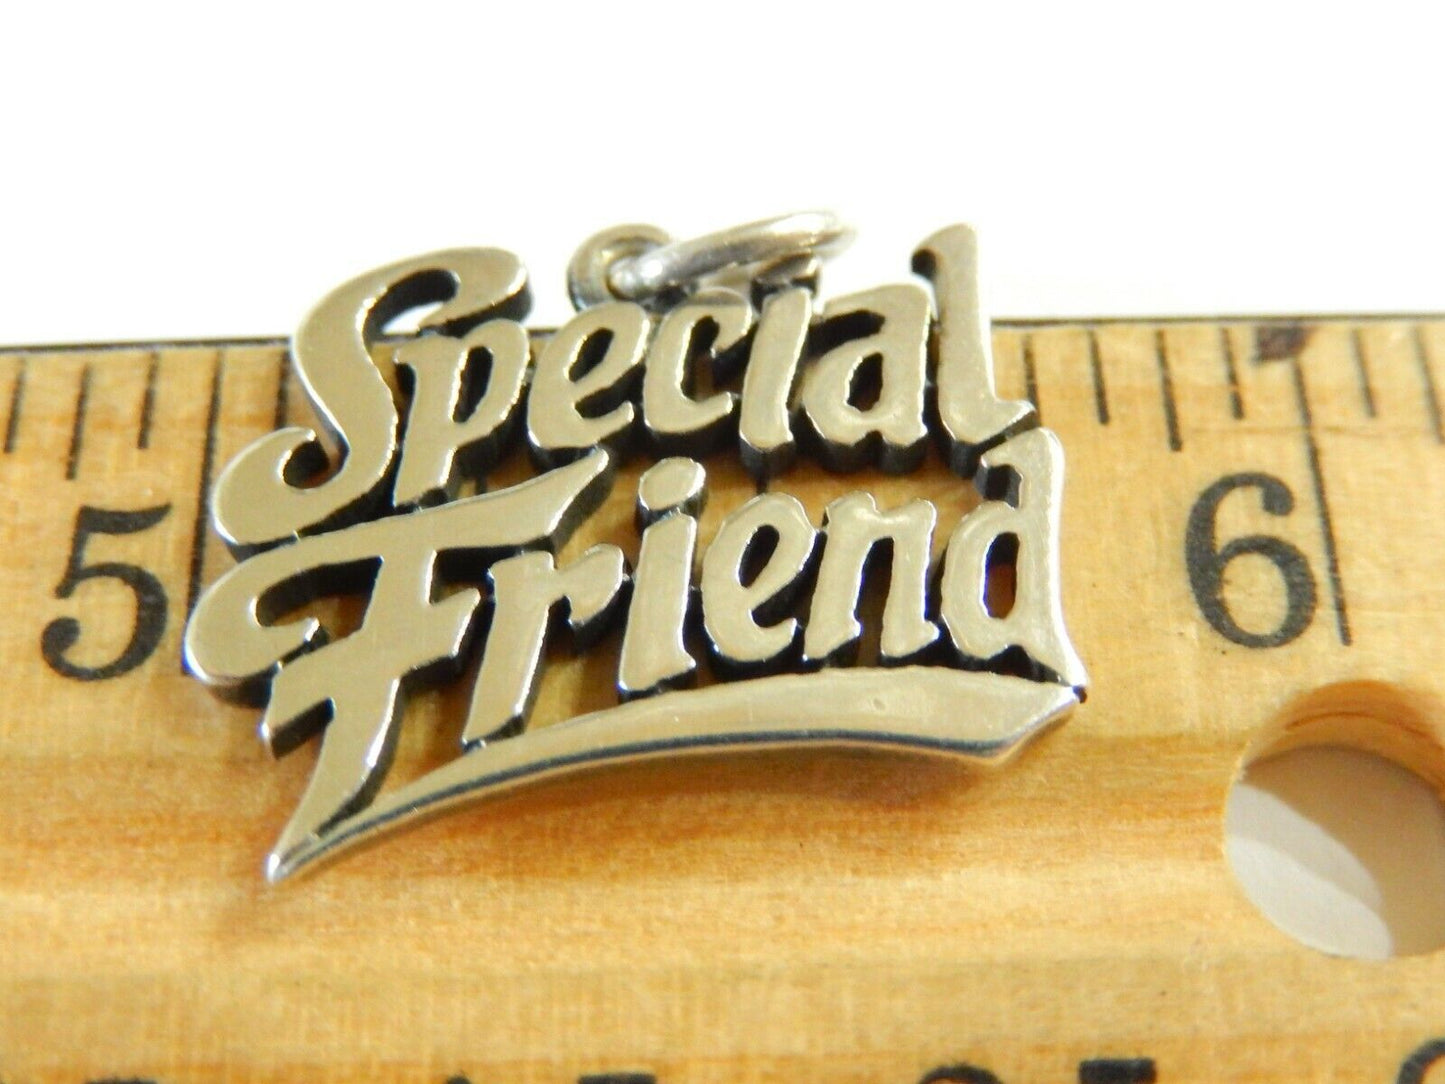 *JAMES AVERY*  R E T I R E D  Sterling Silver Special Friend Charm